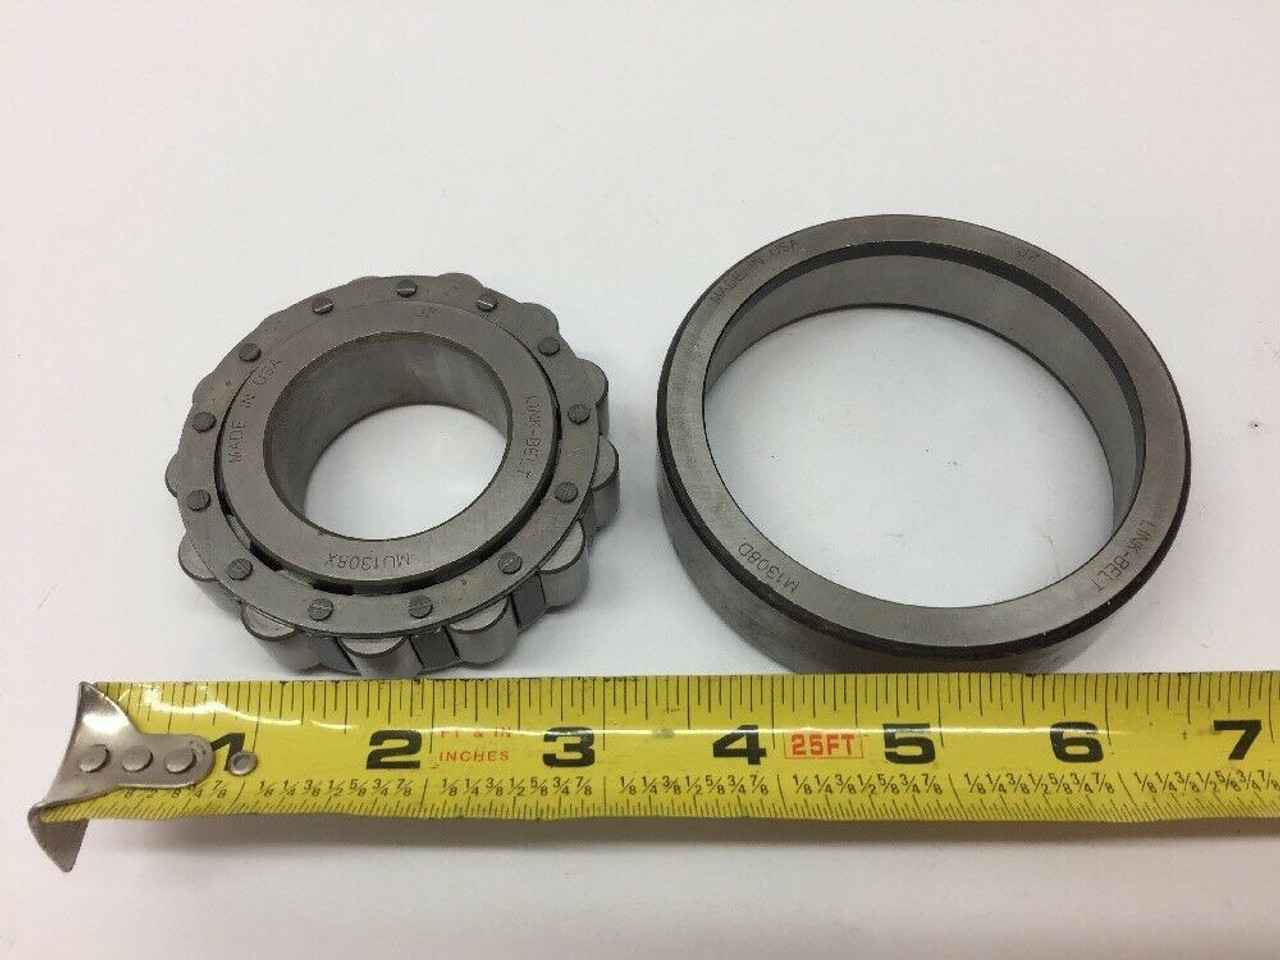 Link-Belt Cylindrical Roller Bearing M1308D with Inner Ring MU1308X